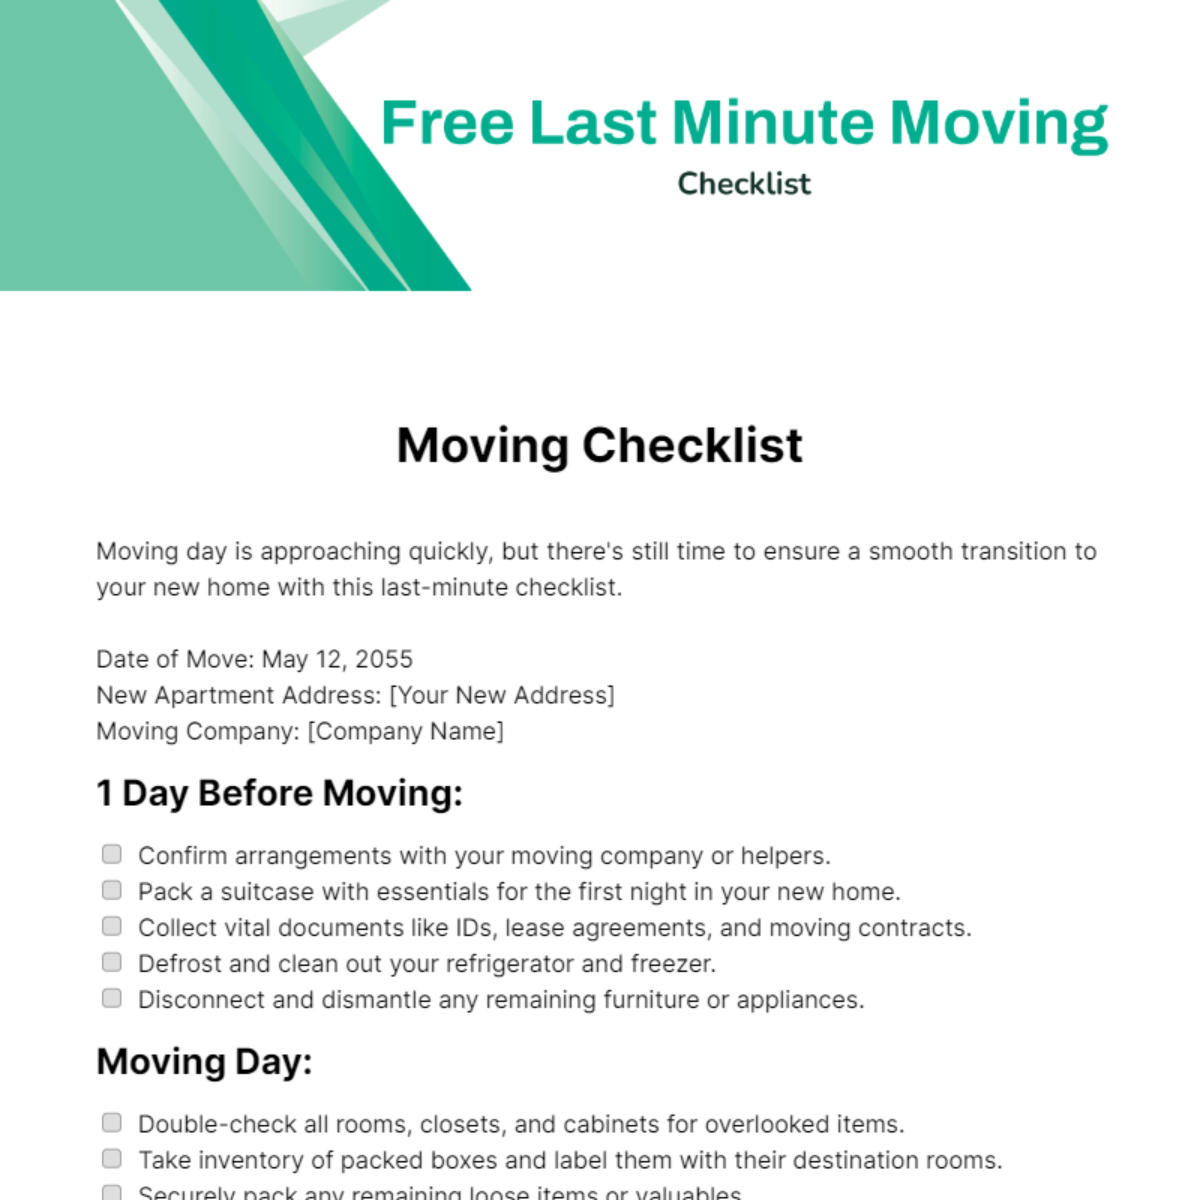 Free Last Minute Moving Checklist Template